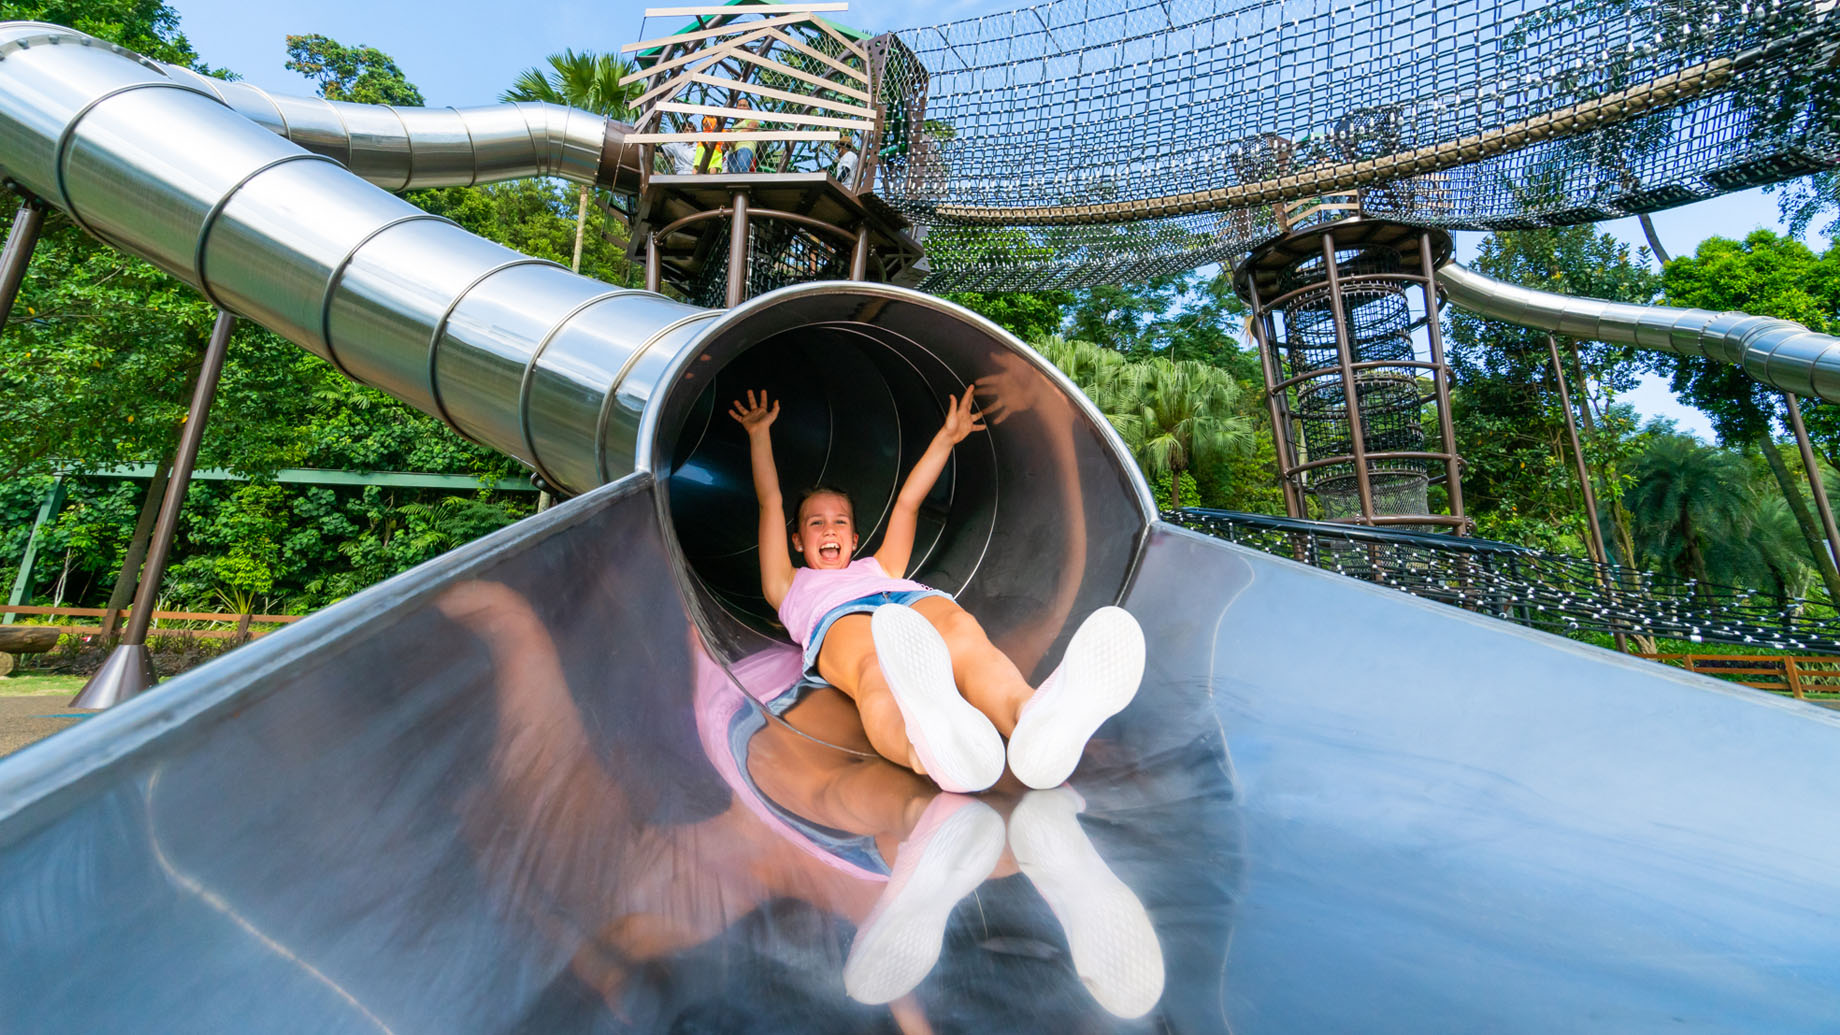 A young girl sliding down a slide in Nestopia